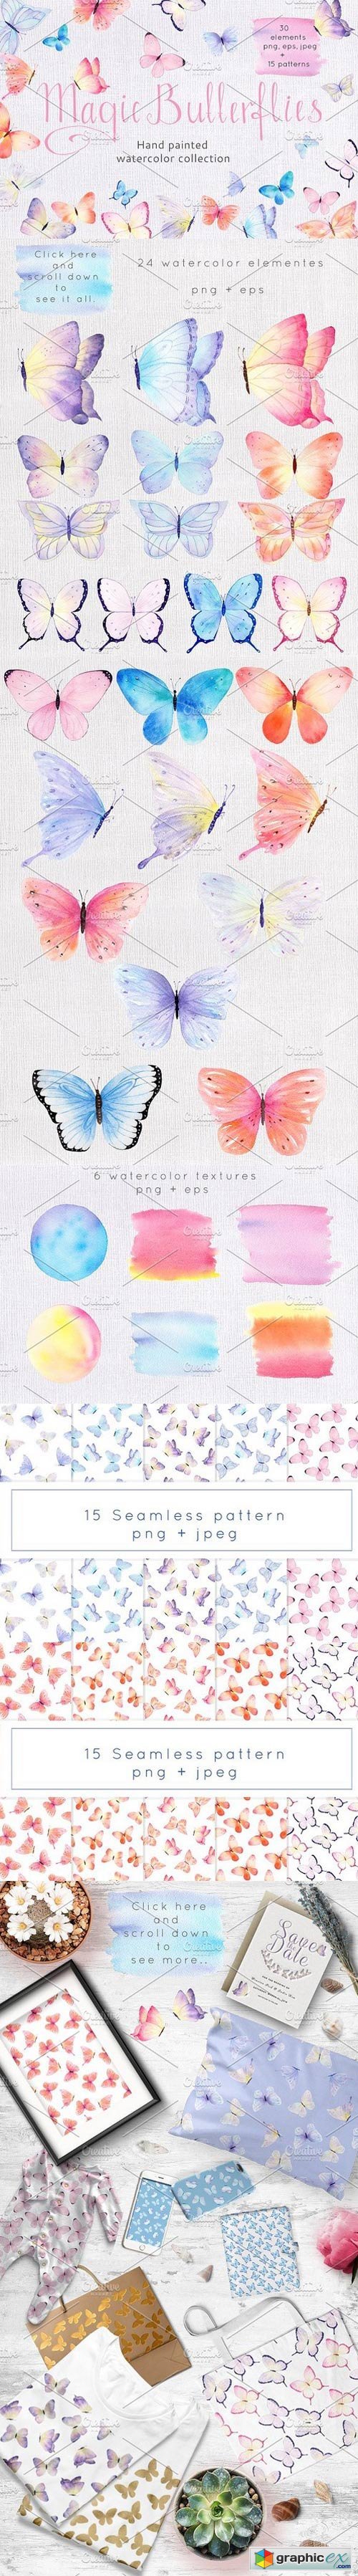 Butterfly Watercolor collection